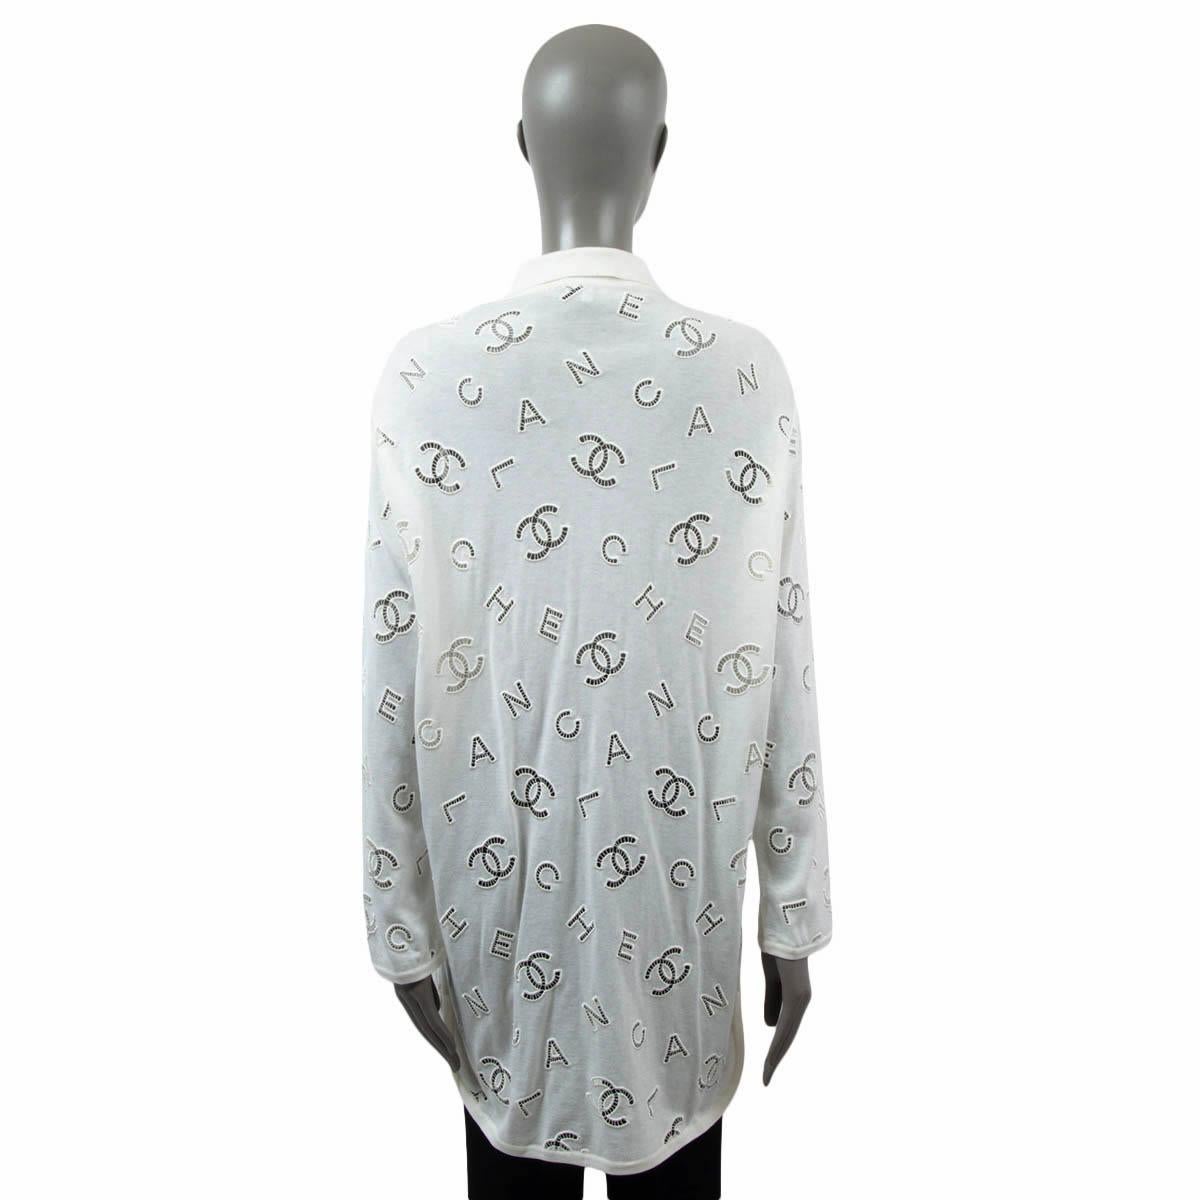 CHANEL ivory cotton 2020 20C LOGO EMBROIDERED Cardigan Sweater 38 S 2